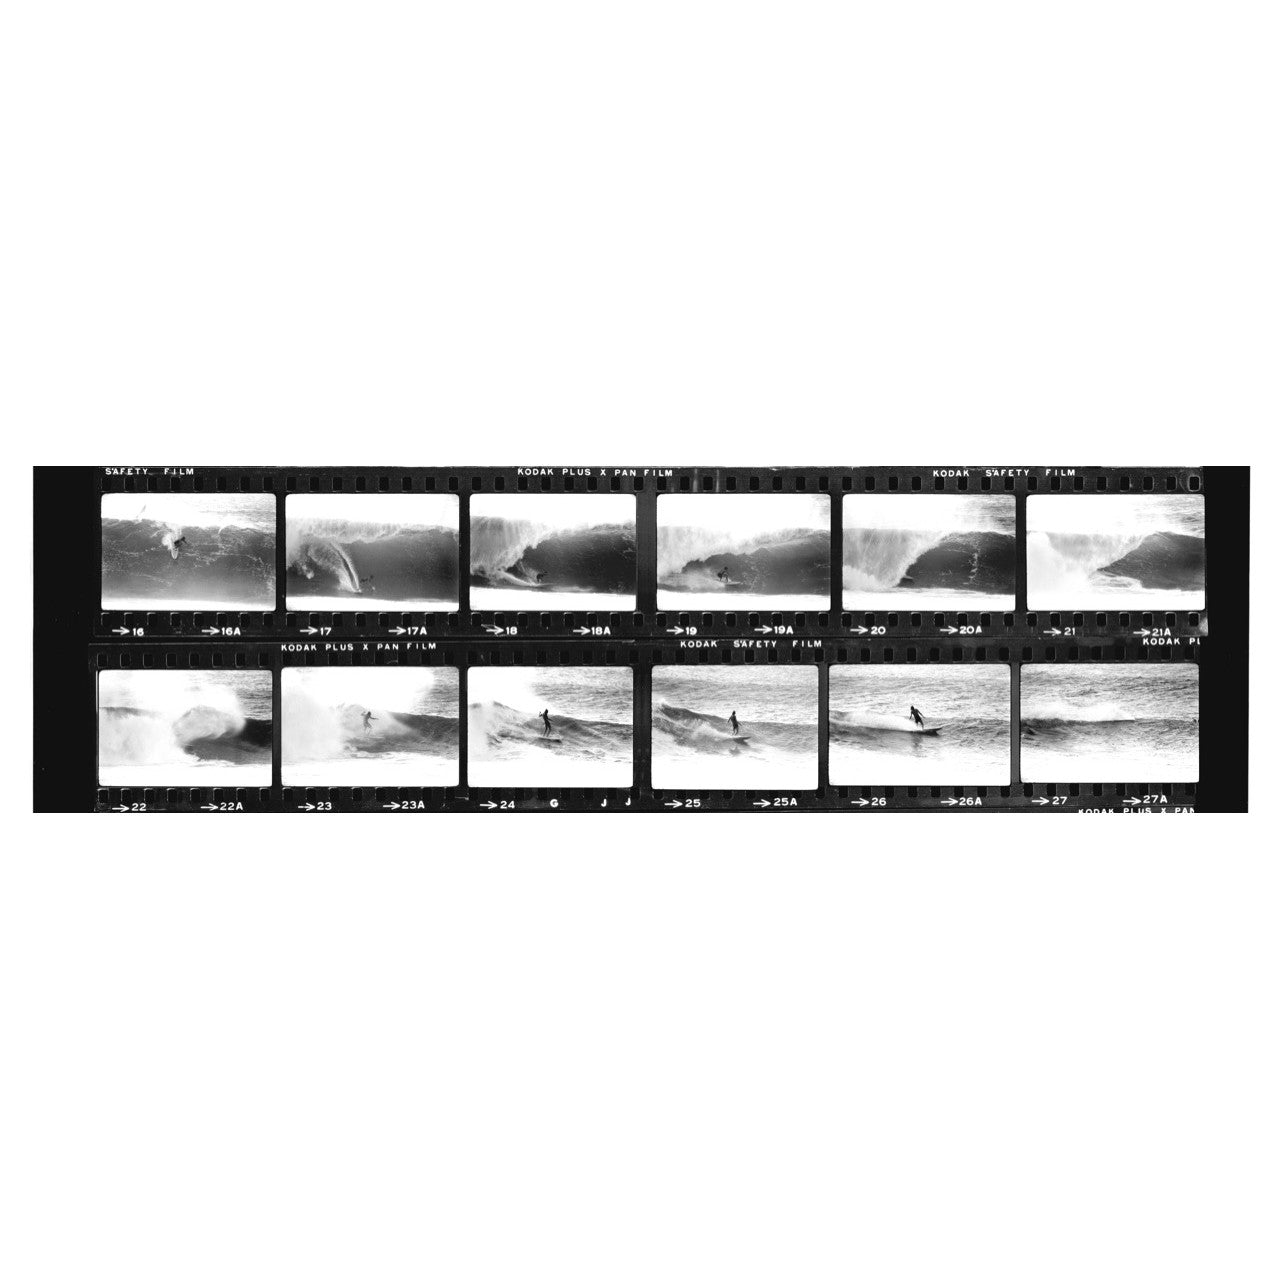 JEFF DIVINE - Photo sequence No2 - Gerry Lopez at Pipeline, Hawaii 1971 - Signed